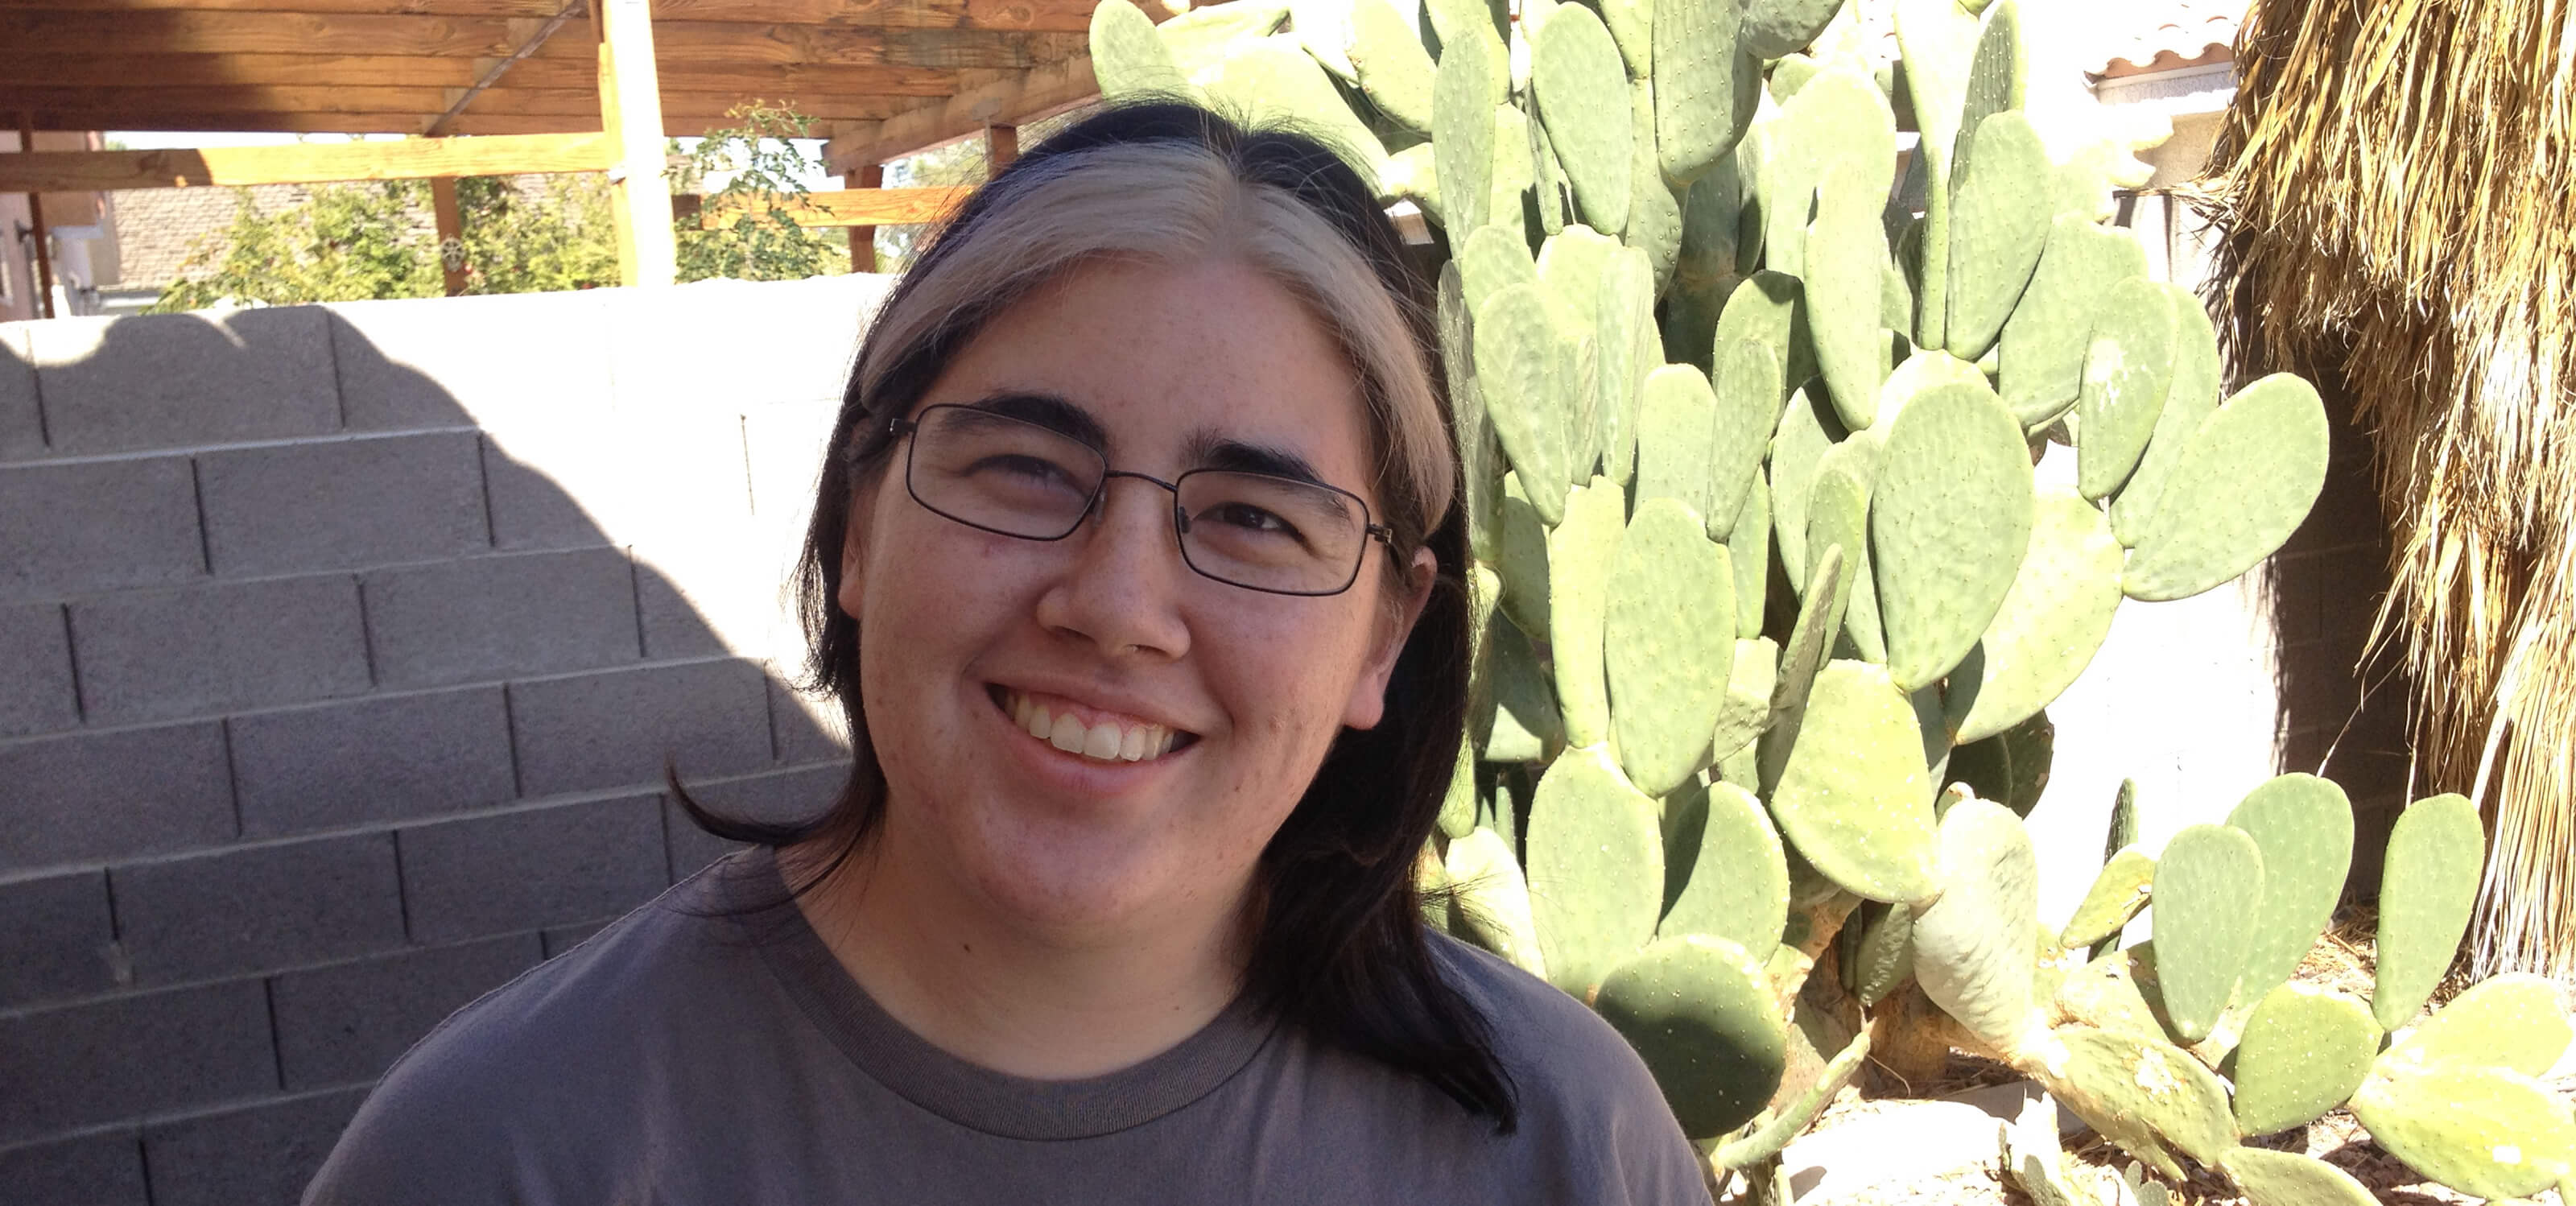 DigiPen graduate and Spry Fox senior software engineer Molly Jameson poses in front of a cactus. 